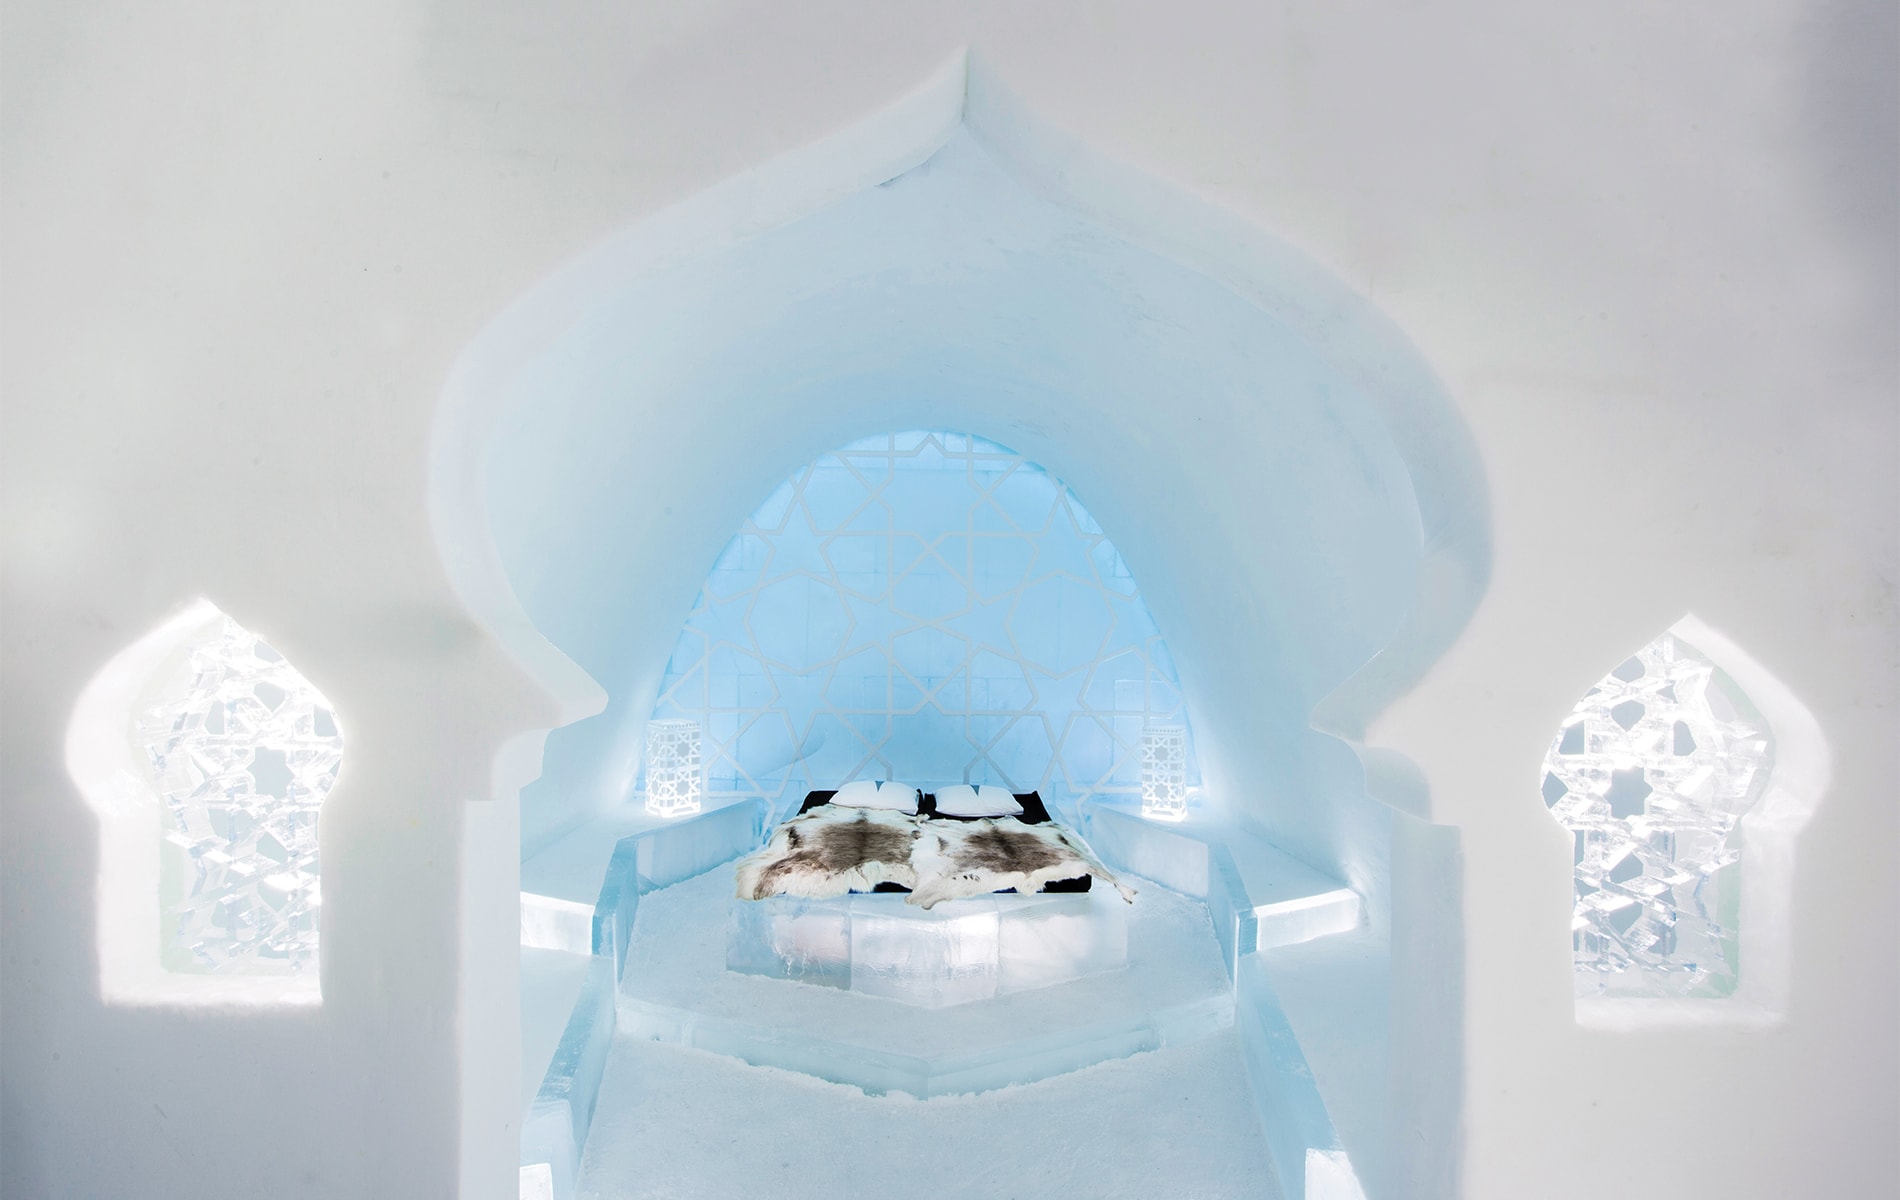 ICEHOTEL insiders recommend guests spend their first or last night in one of the cold rooms and enjoy warm accommodations for the remainder of their stay.